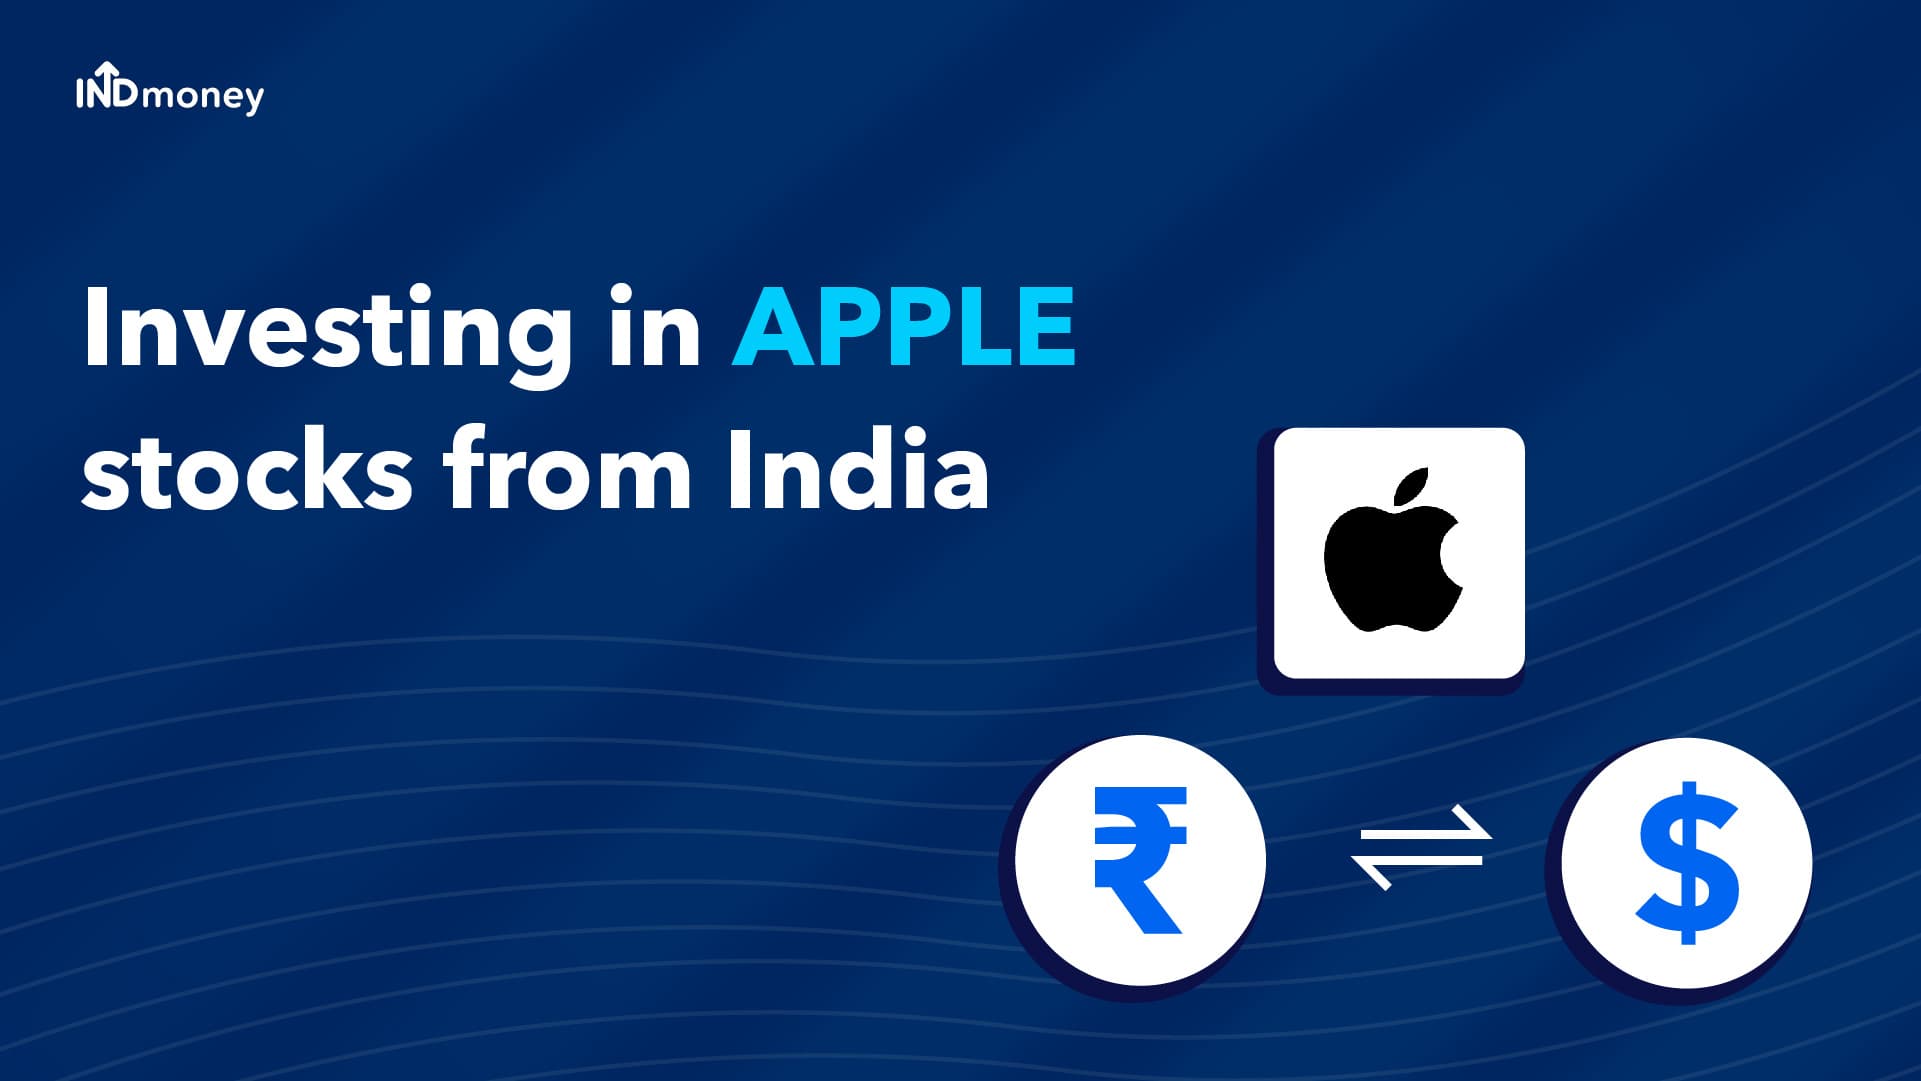 How to Buy Apple Shares in India: Invest in Apple stocks from India | INDmoney